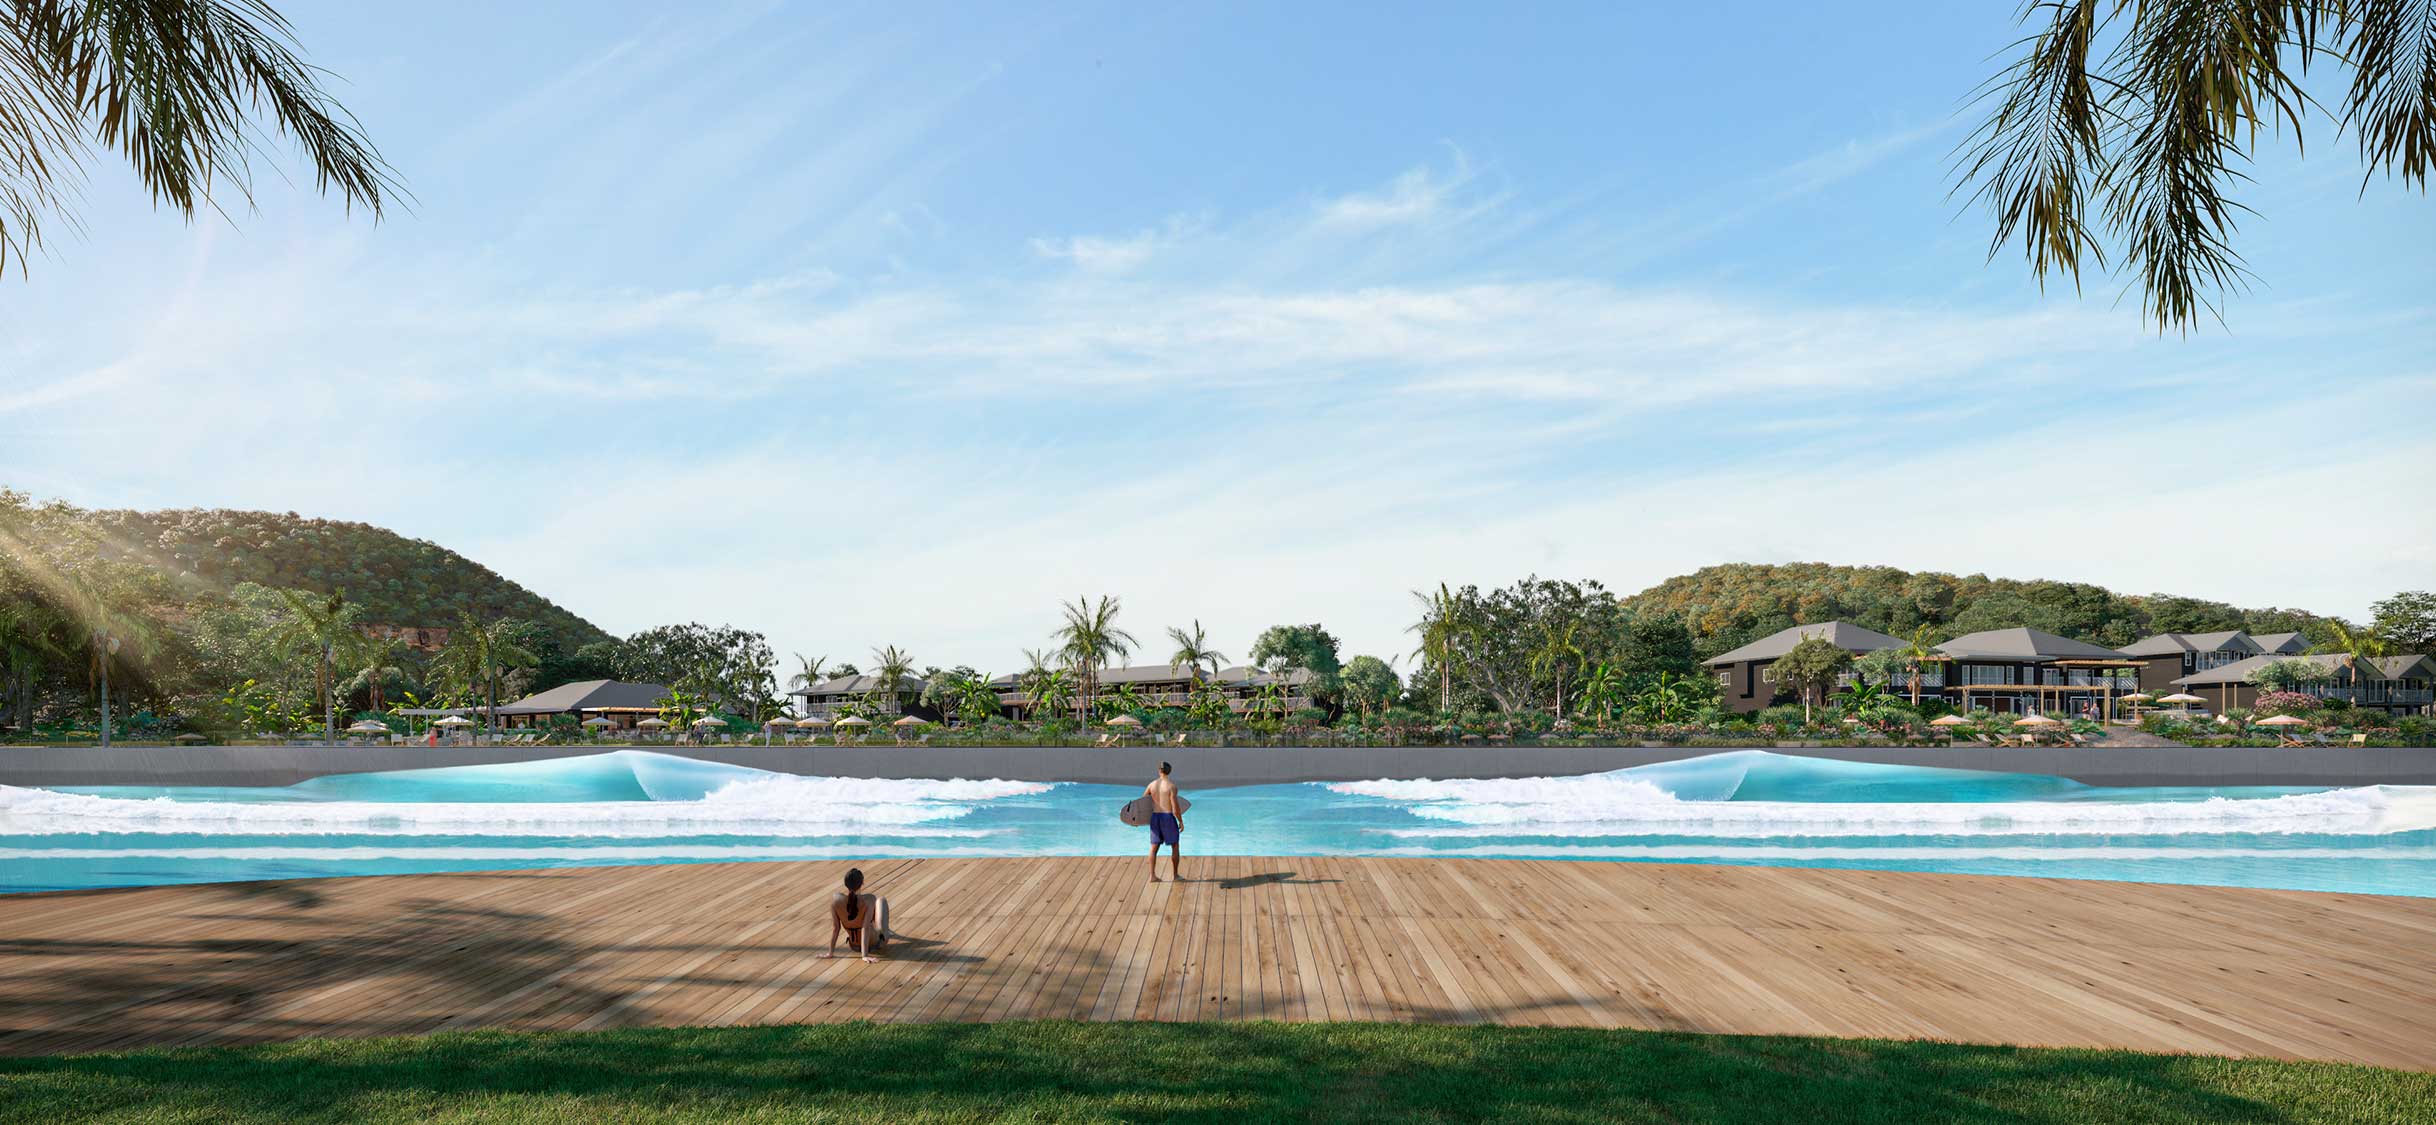 rendering of a Wisemans Surf Lodge - a surf park coming to Sydney, Australia